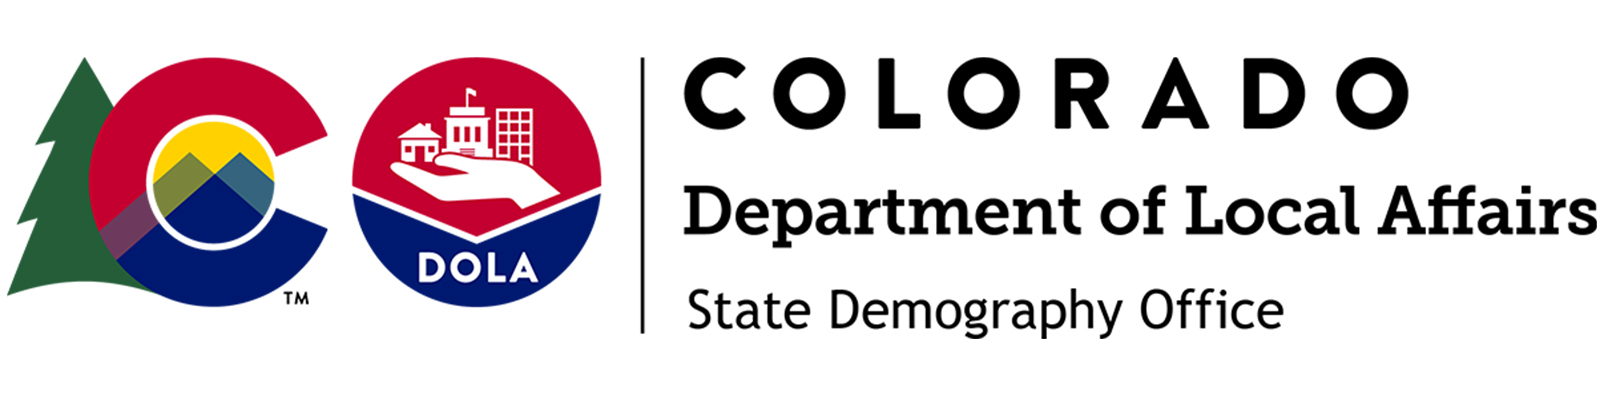 Department of Local Affairs Homepage